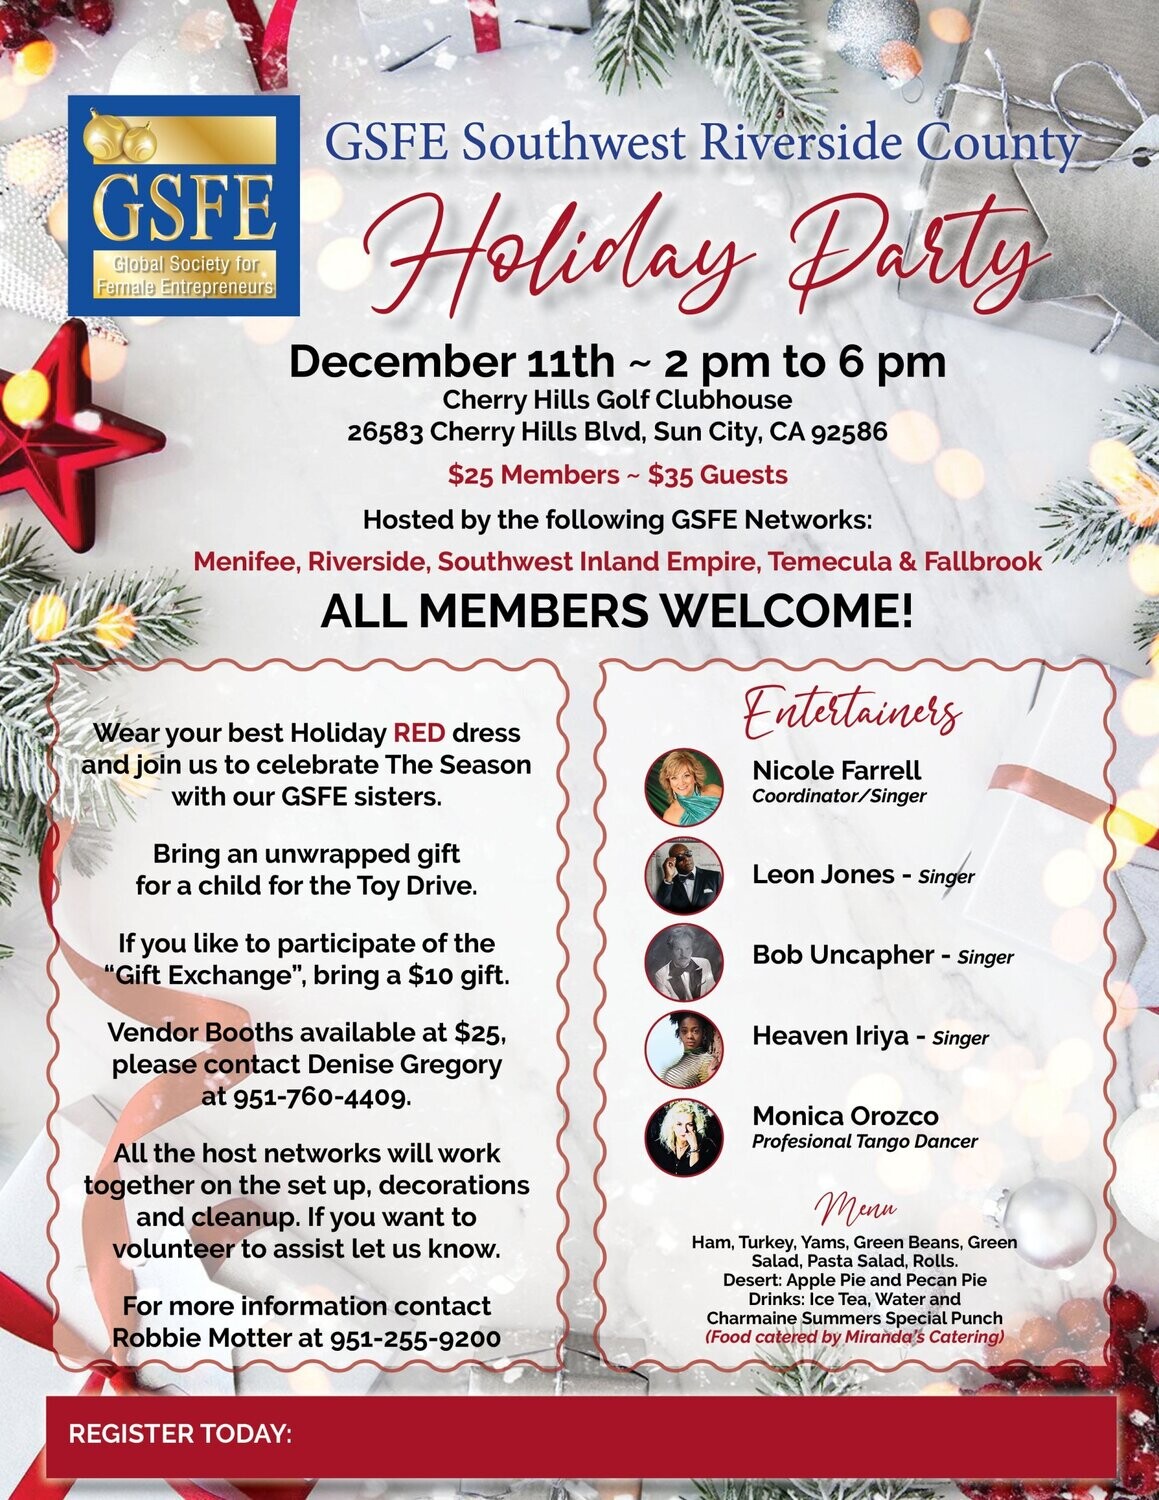 Z - 1A-GSFE Southwest Riverside County - Holiday Party (GUESTS)